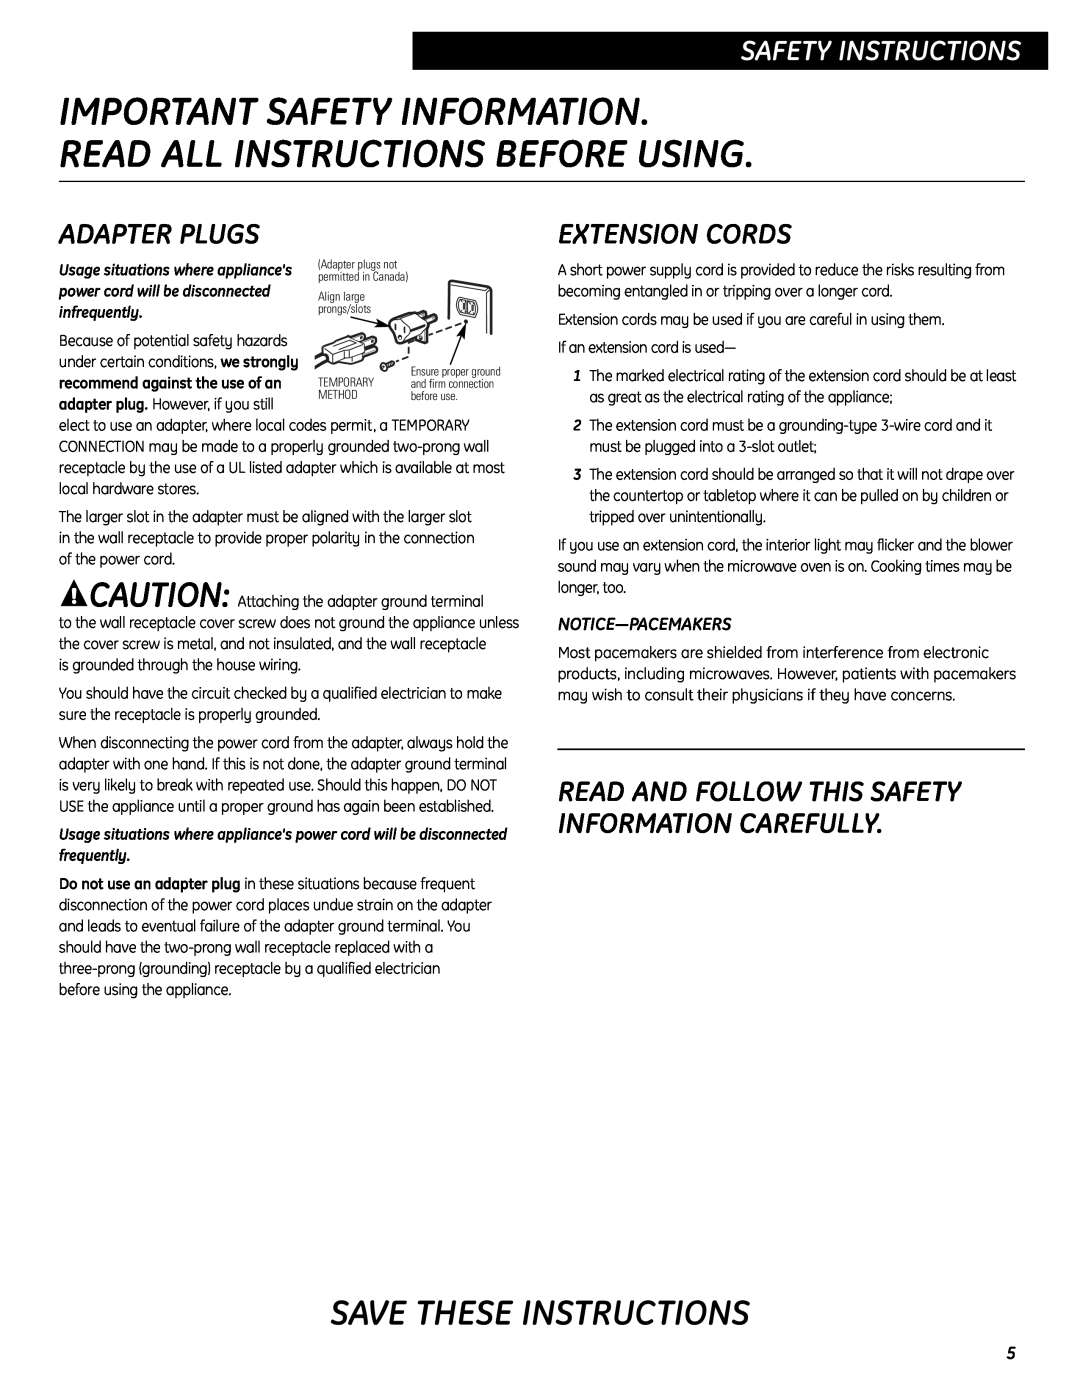 GE SES0732 quick start Adapter Plugs, Extension Cords, Notice-Pacemakers, Save These Instructions, Safety Instructions 